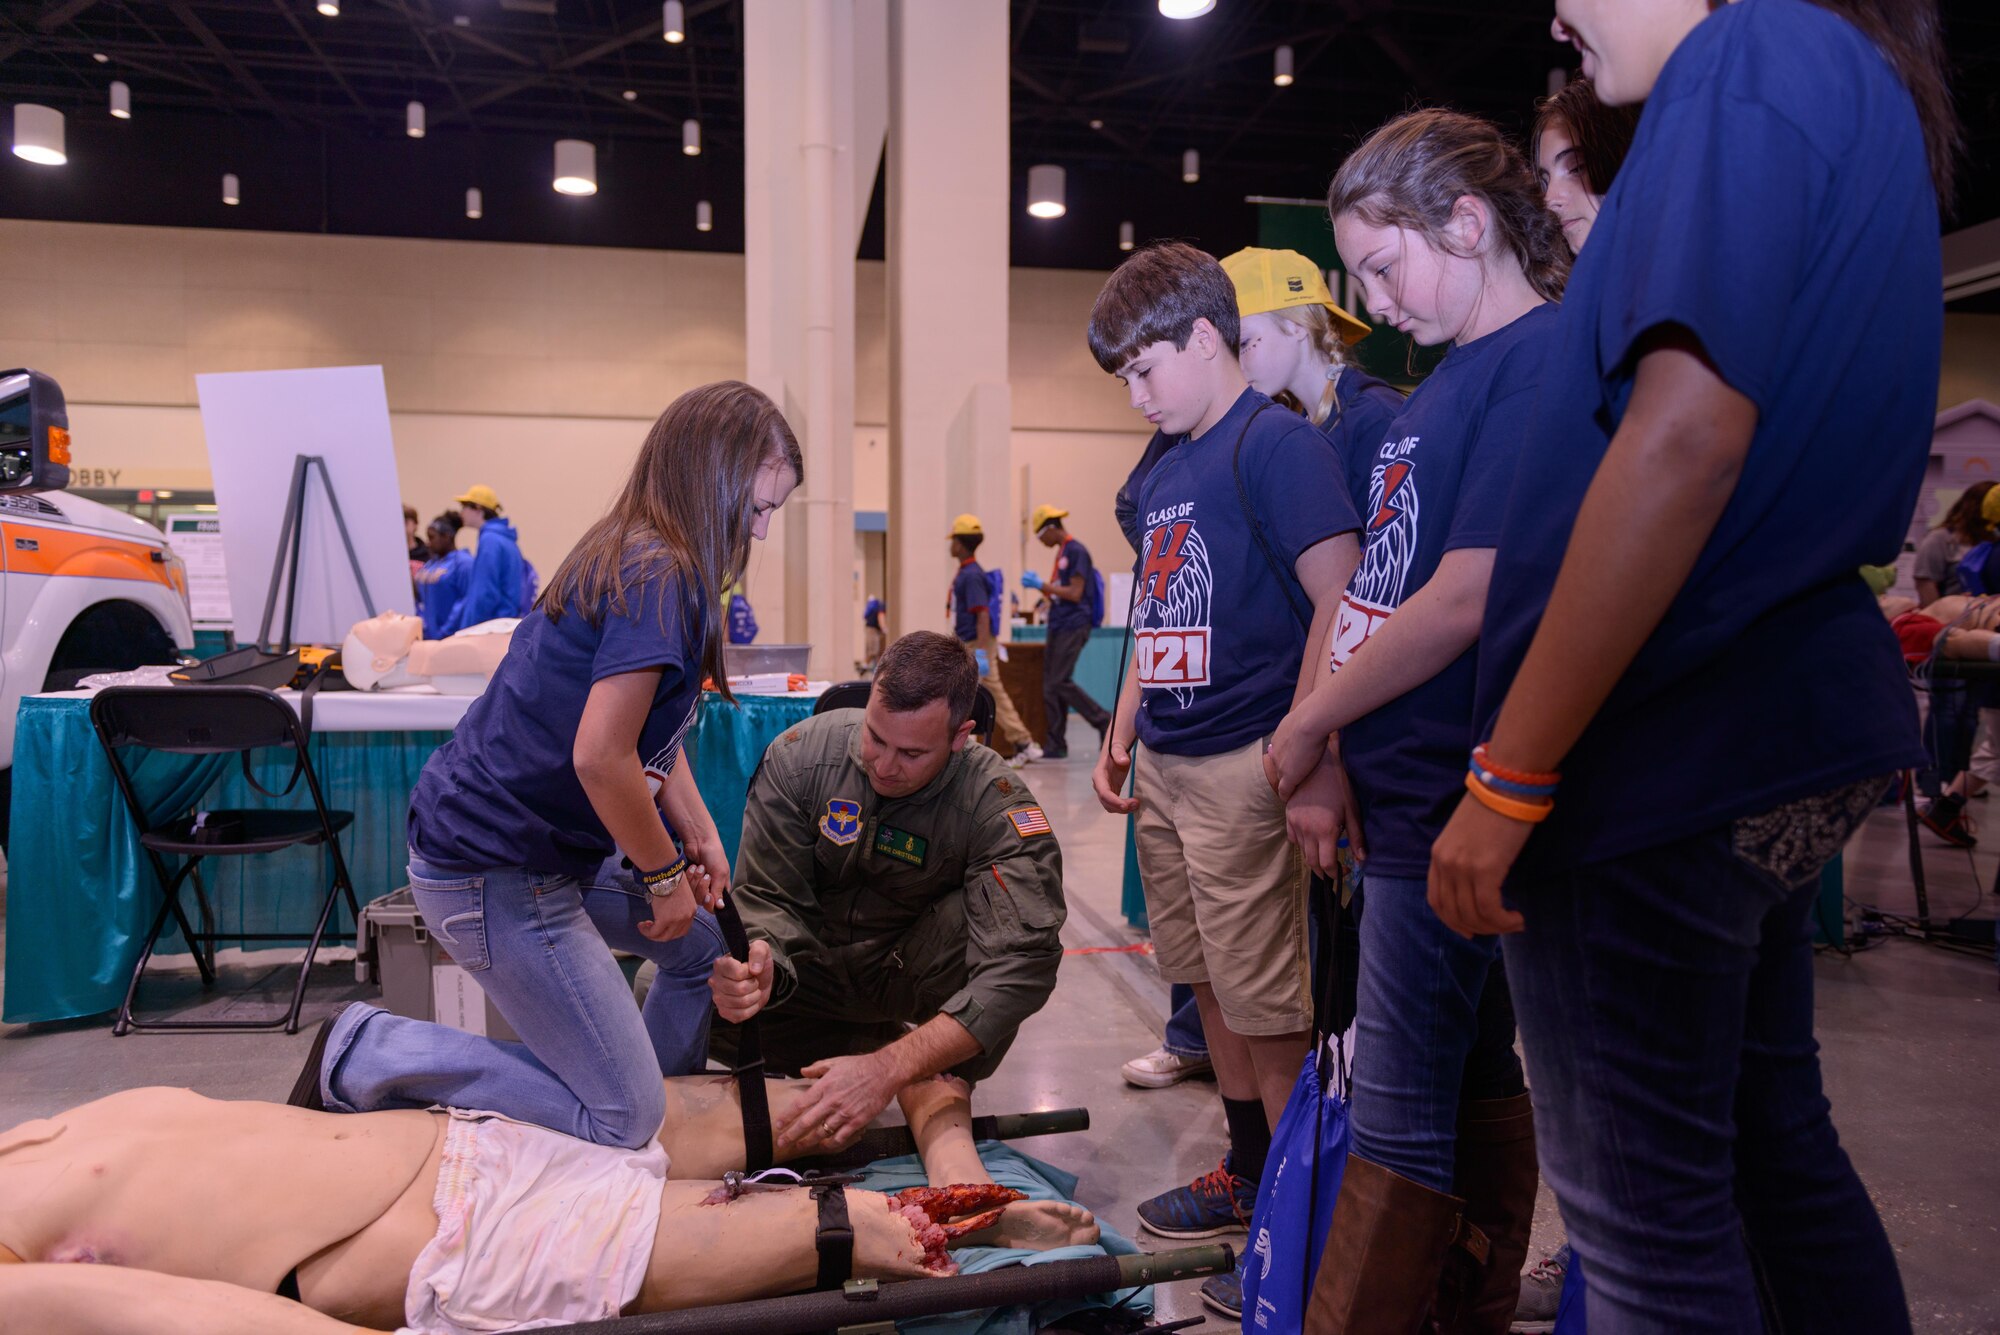 Maj. Lewis Christensen, 81st Medical Operations Squadron emergency room nurse and team tactical critical care evacuation team element leader, Keesler Air Force Base, Miss., supervises Jasmine Alexander, Hancock Middle School student, on proper procedures when applying a tourniquet as fellow students observe during the Pathways2Possibilities (P2P) at the Mississippi Coast Coliseum & Convention Center Nov. 16, 2016, in Biloxi, Miss.  P2P is a hands-on interactive career expo for all 8th graders and at-risk youth, ages 16-24 in South Mississippi. (U.S. Air Force photo by André Askew/Released)